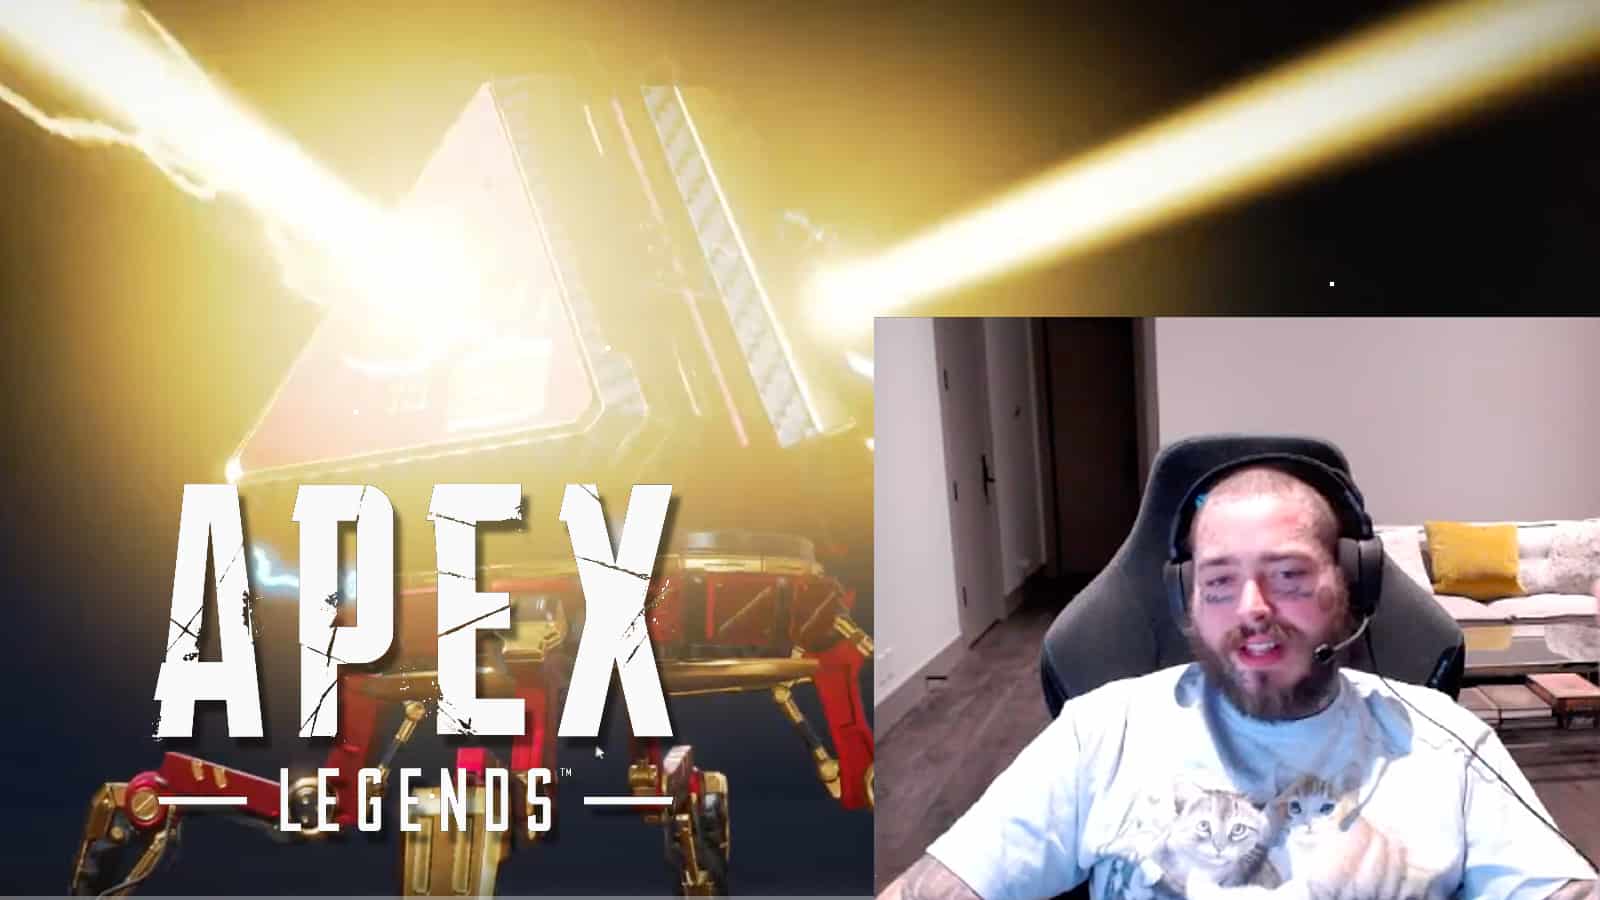 Post Malone playing Apex Legends